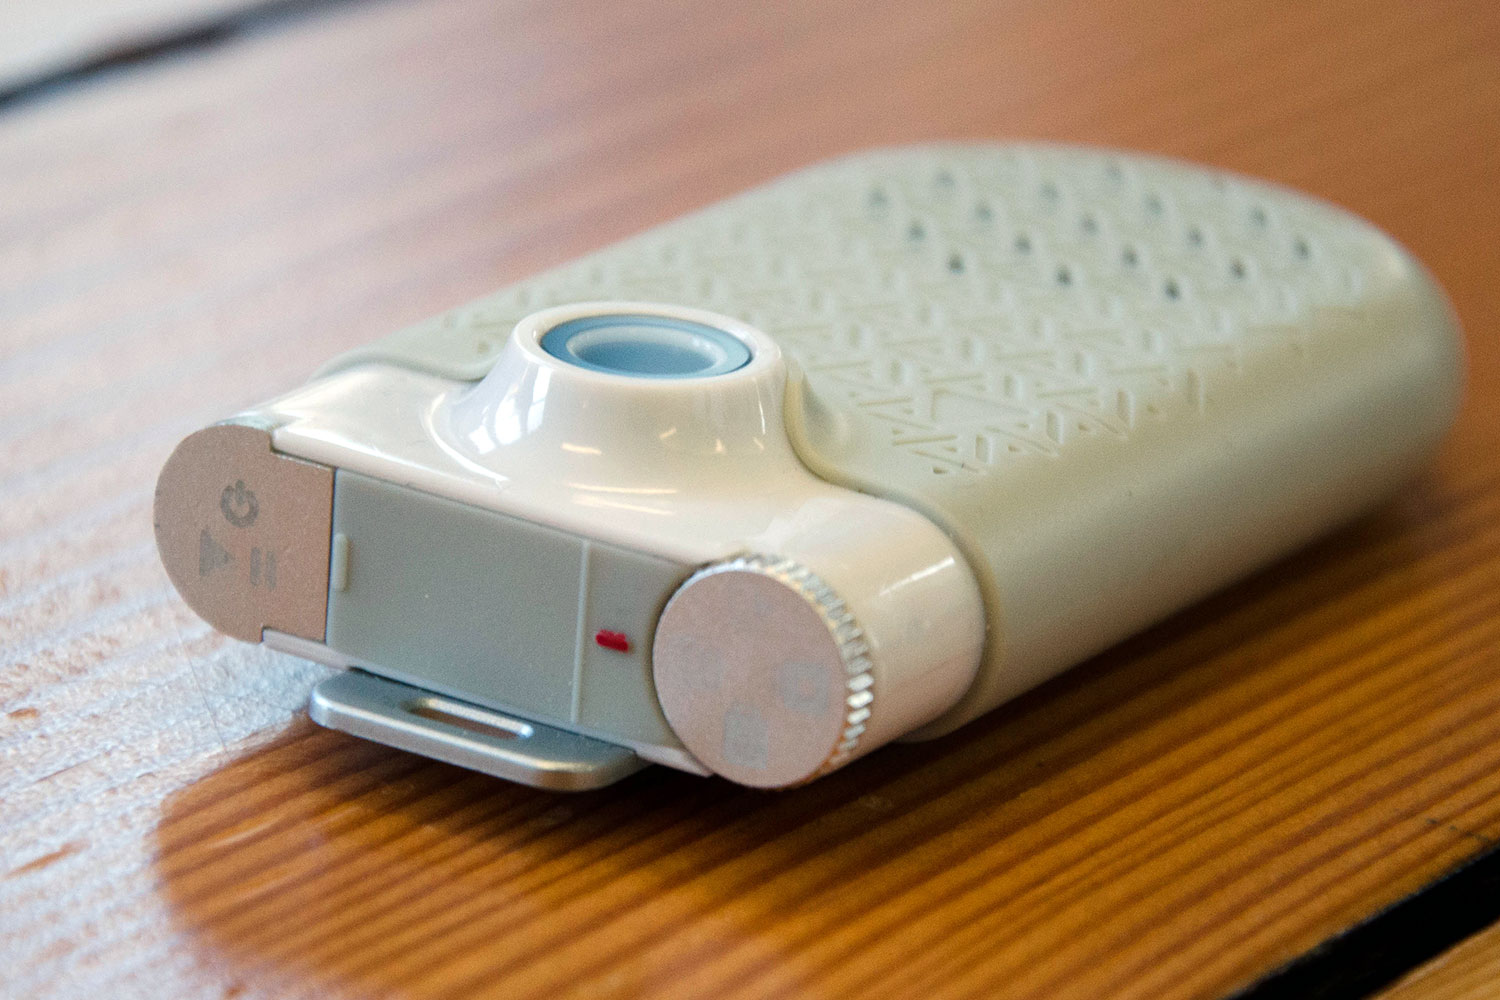 zagg now cam is a pocket camcorder that doubles as mini bluetooth speaker 8608